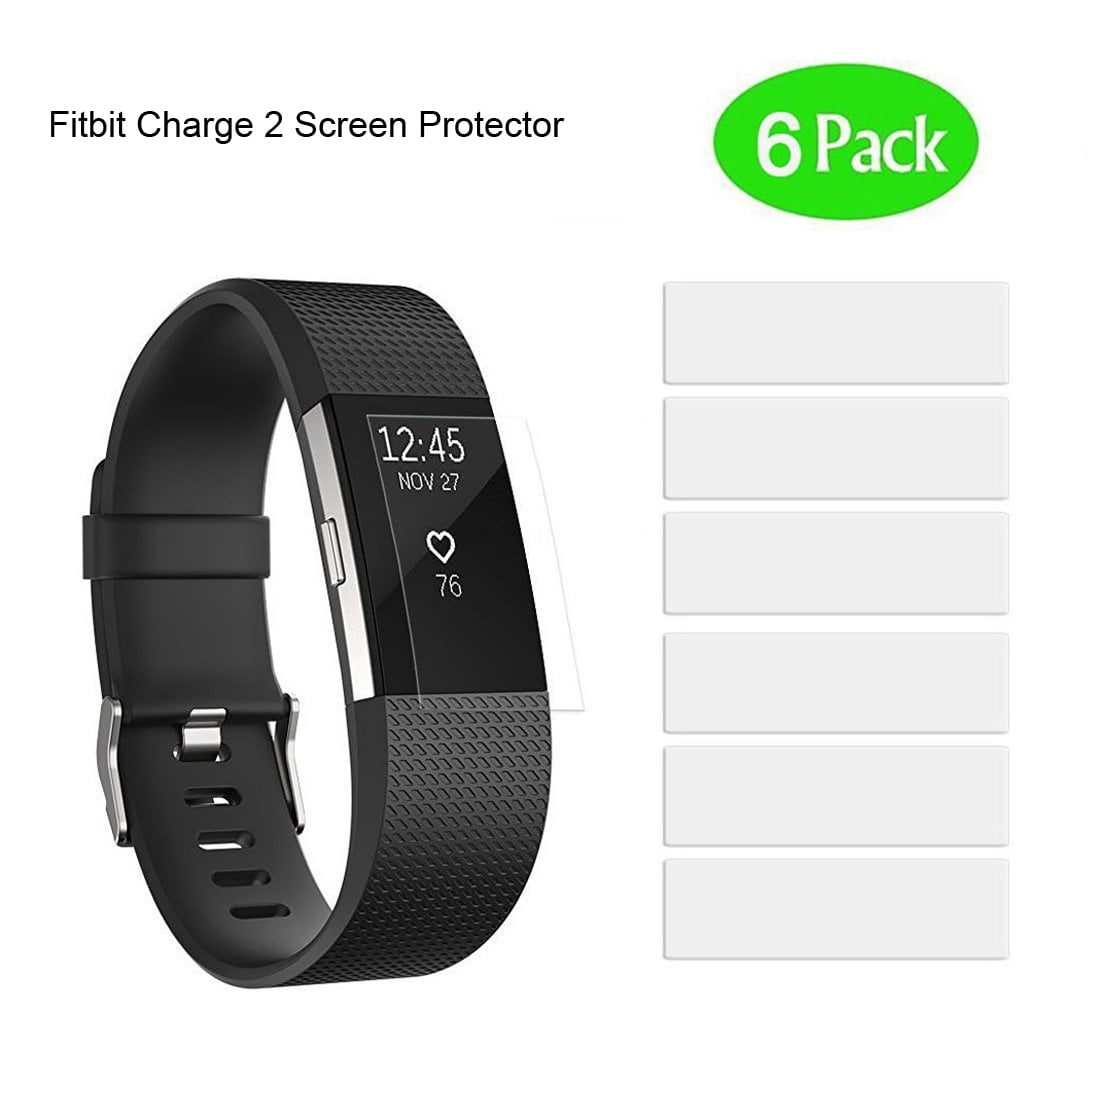 screen protector for fitbit charge 2